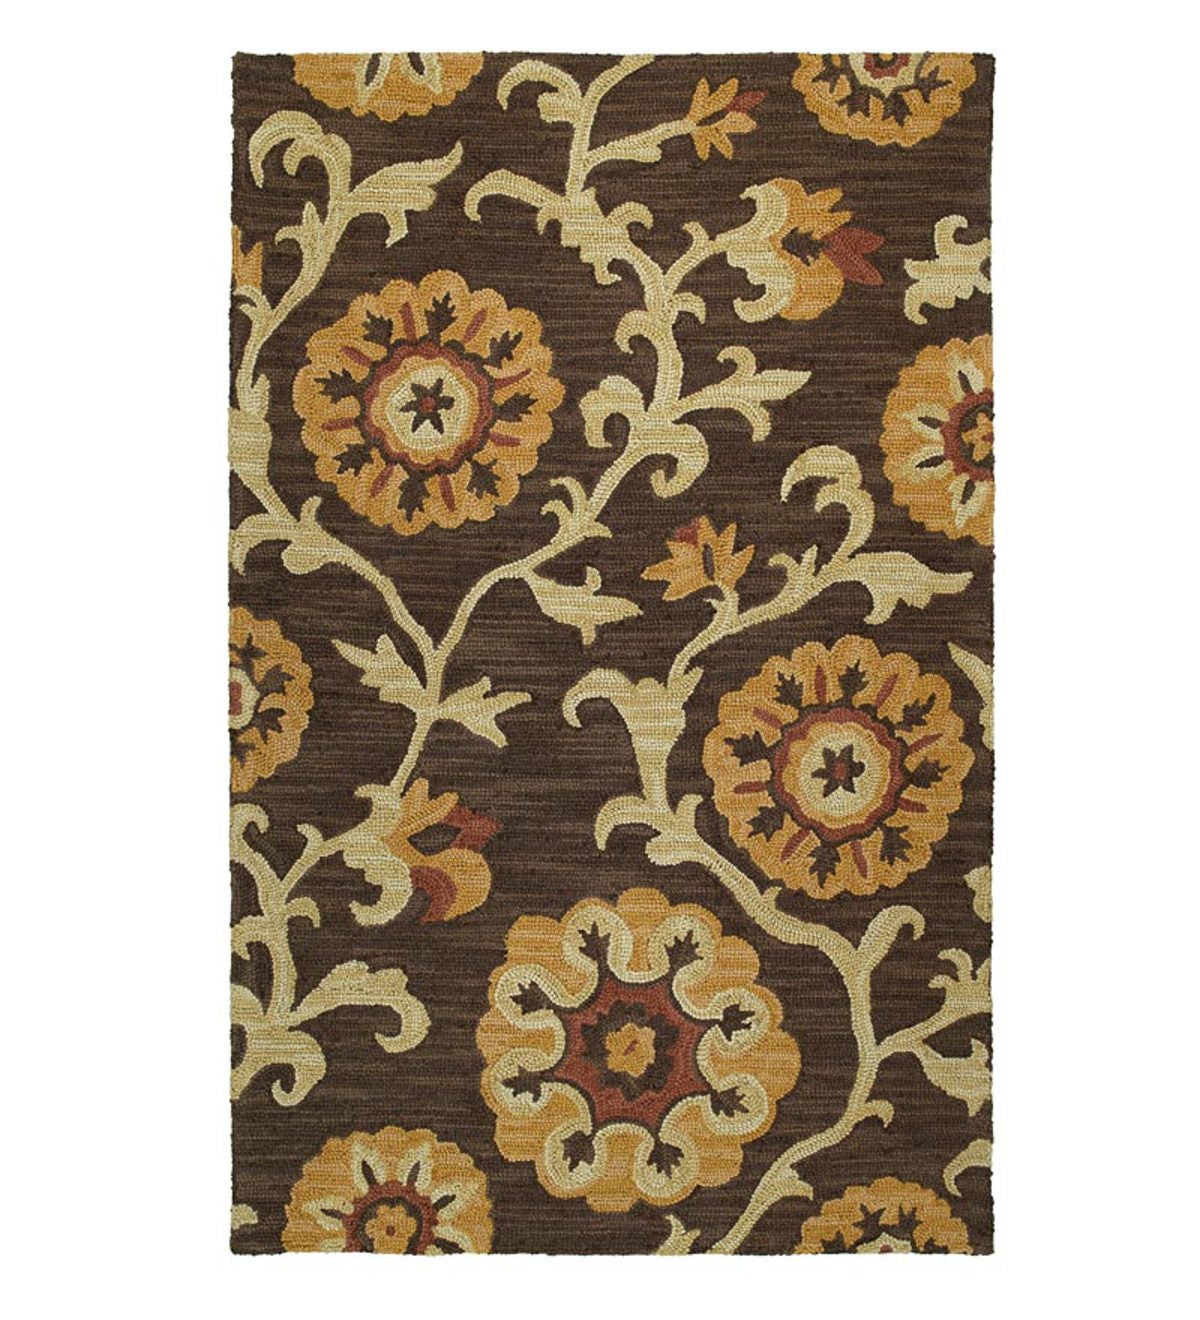 2' x 3' Carriage Floral Rug - Brown